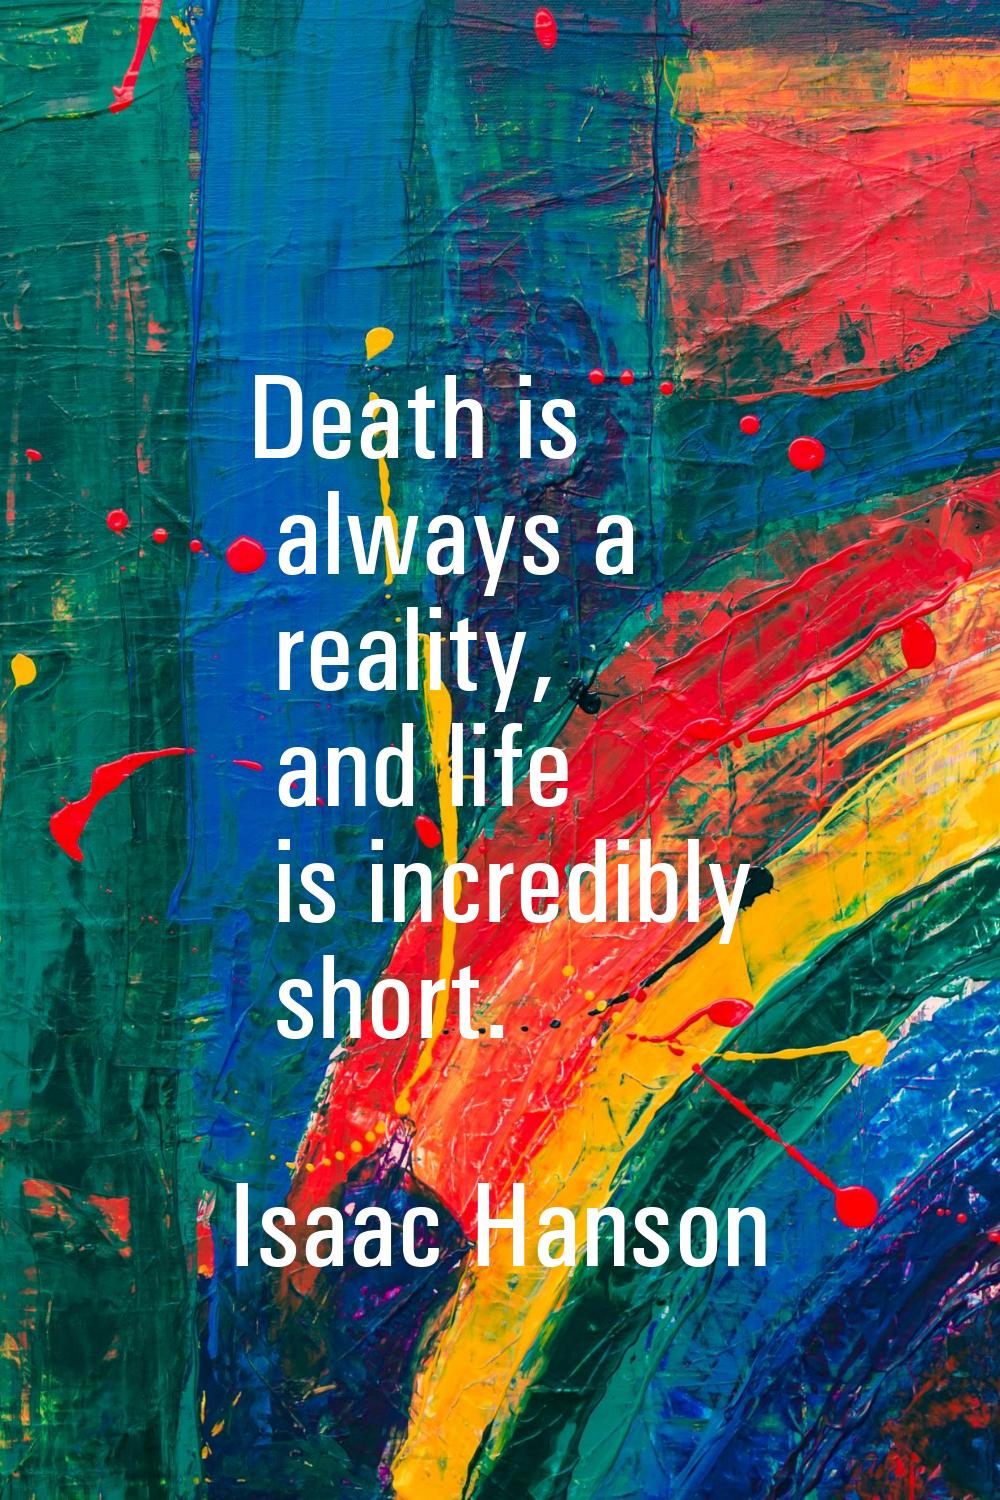 Death is always a reality, and life is incredibly short.